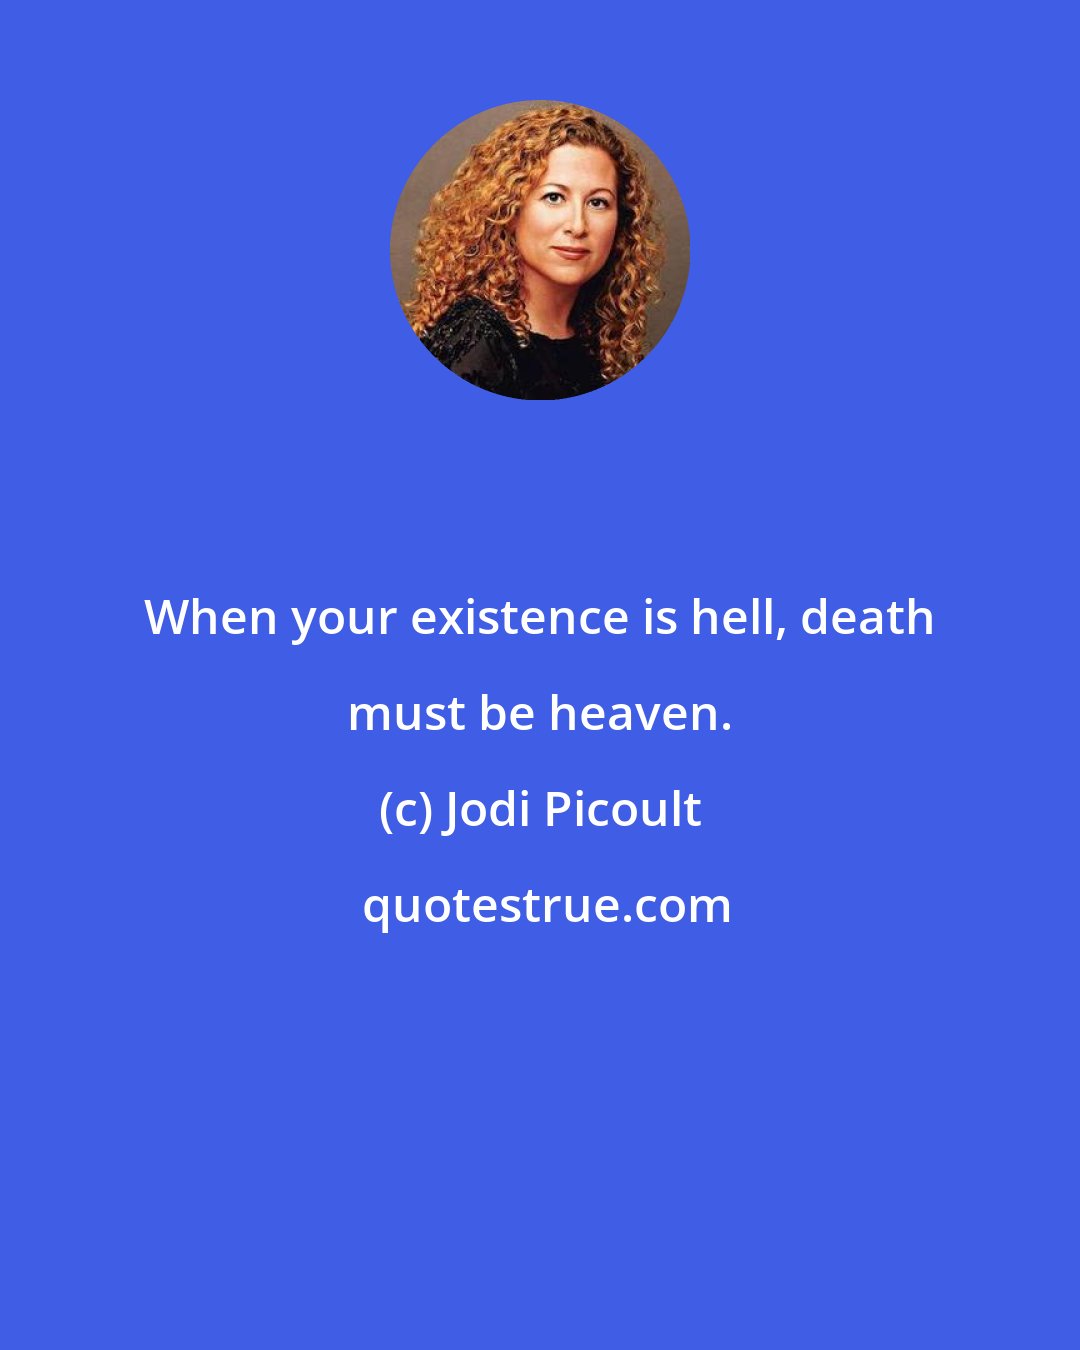 Jodi Picoult: When your existence is hell, death must be heaven.